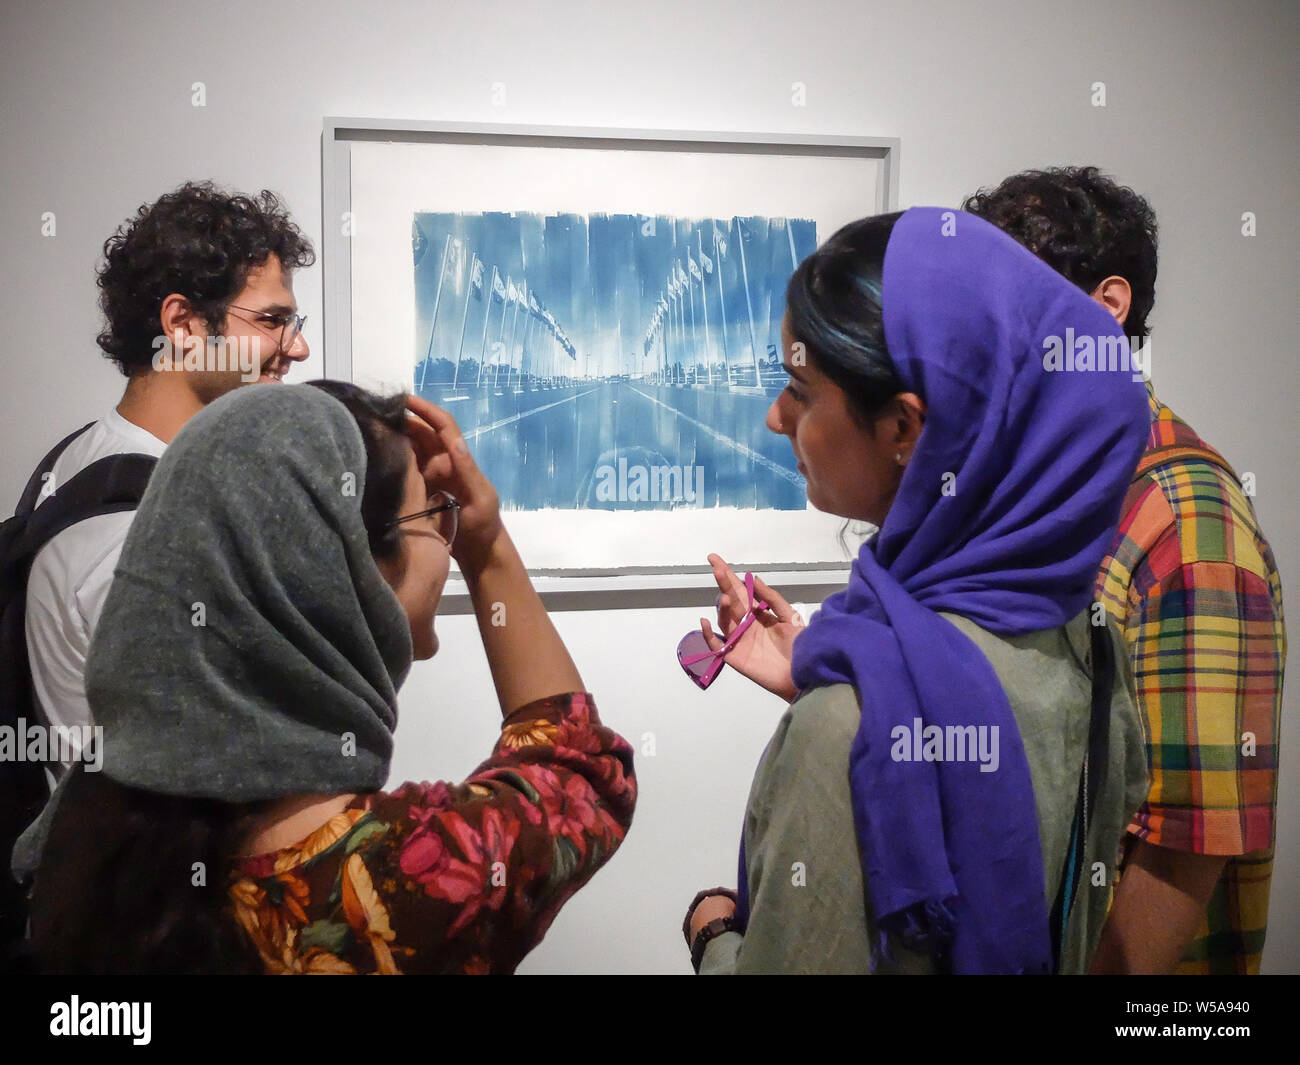 July 26, 2019, Tehran, Tehran, IRAN: People visit Vahid Dashtyari and Mehdi Khandan's photo exhibition at Mohsen Gallery in downtown Tehran, Iran. The two-man photo show by Vahid Dashtyari and Mehdi Khandan is about alternative photographic processes, namely gelatin silver, and cyanotype, to record reality: One is seeking to recover the lost spirit of photography and revert something fake to its original form, while the other is searching for the lost soul of the city, changing something authentic to a counterfeit. Credit: Rouzbeh Fouladi/ZUMA Wire/Alamy Live News Stock Photo